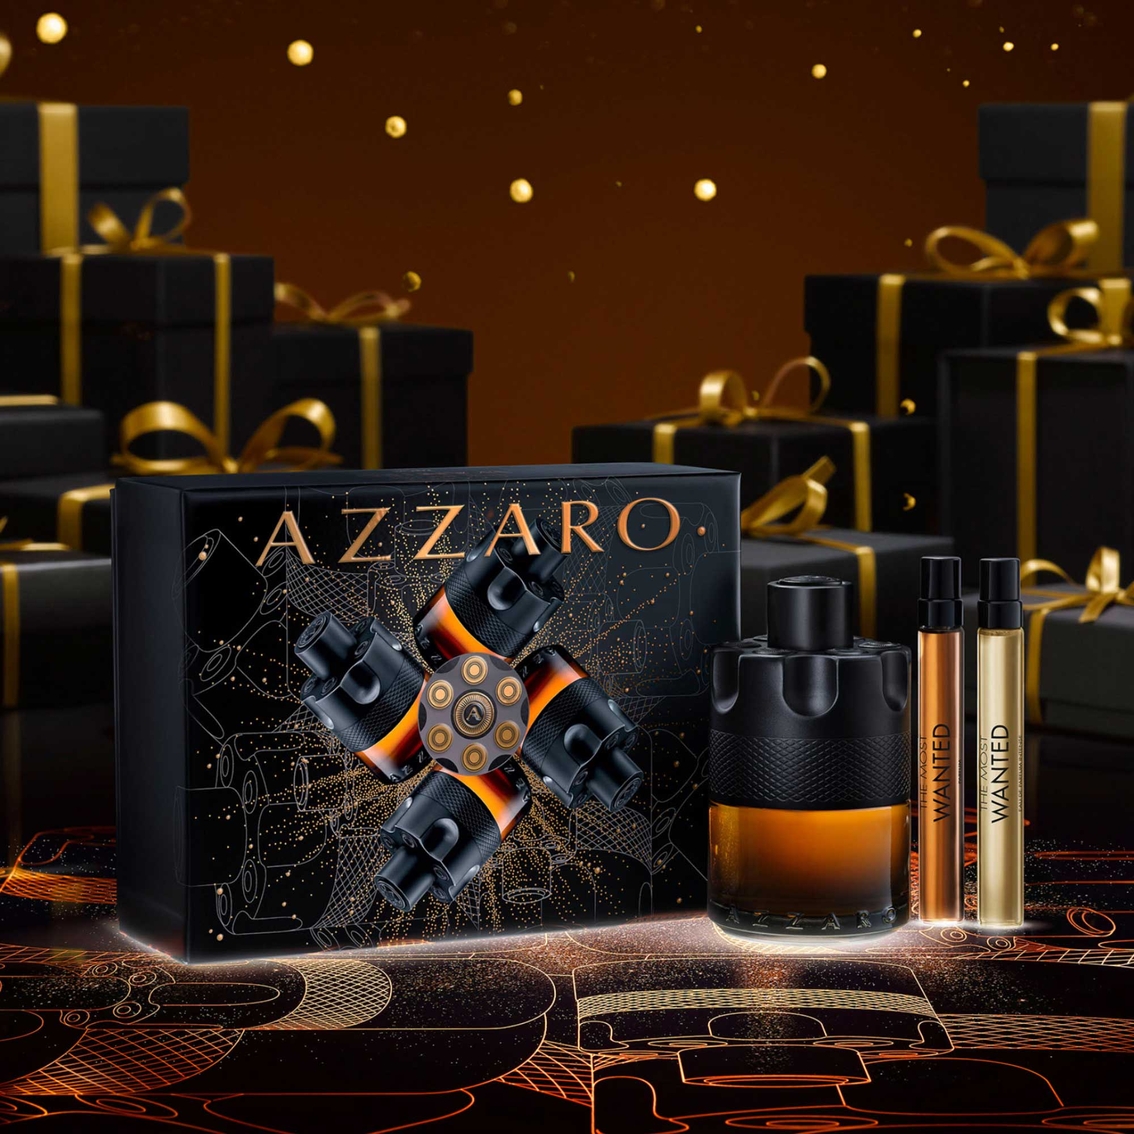 Azzaro The Most Wanted Parfum 3 pc. Gift Set - Image 2 of 3